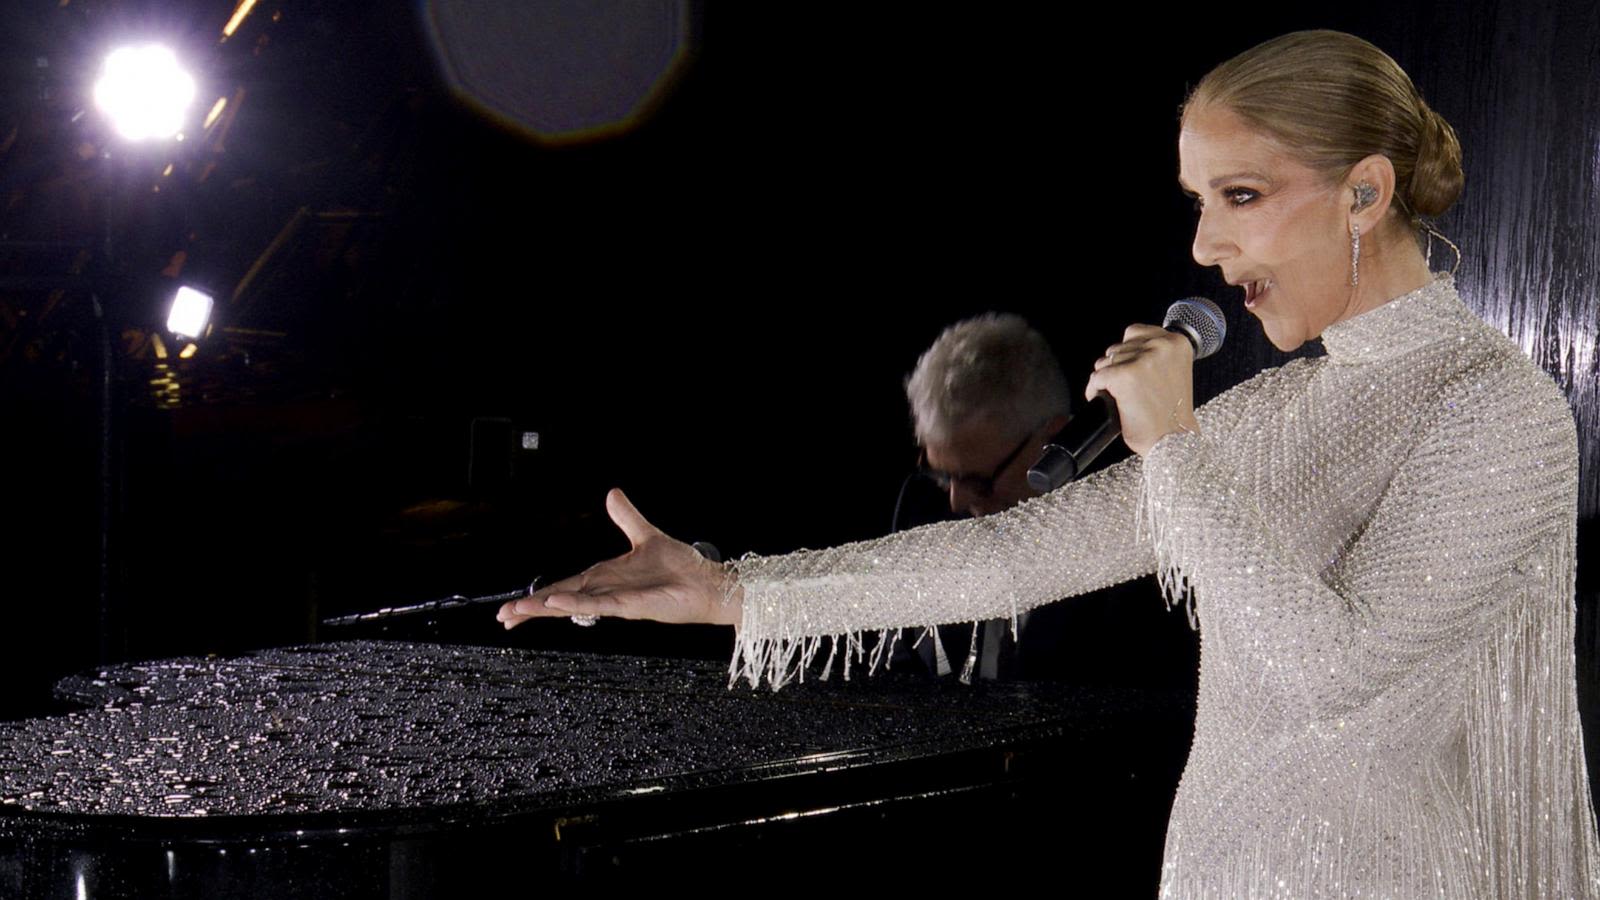 Celine Dion reflects on taking the stage at Paris Olympics opening ceremony: 'So full of joy'